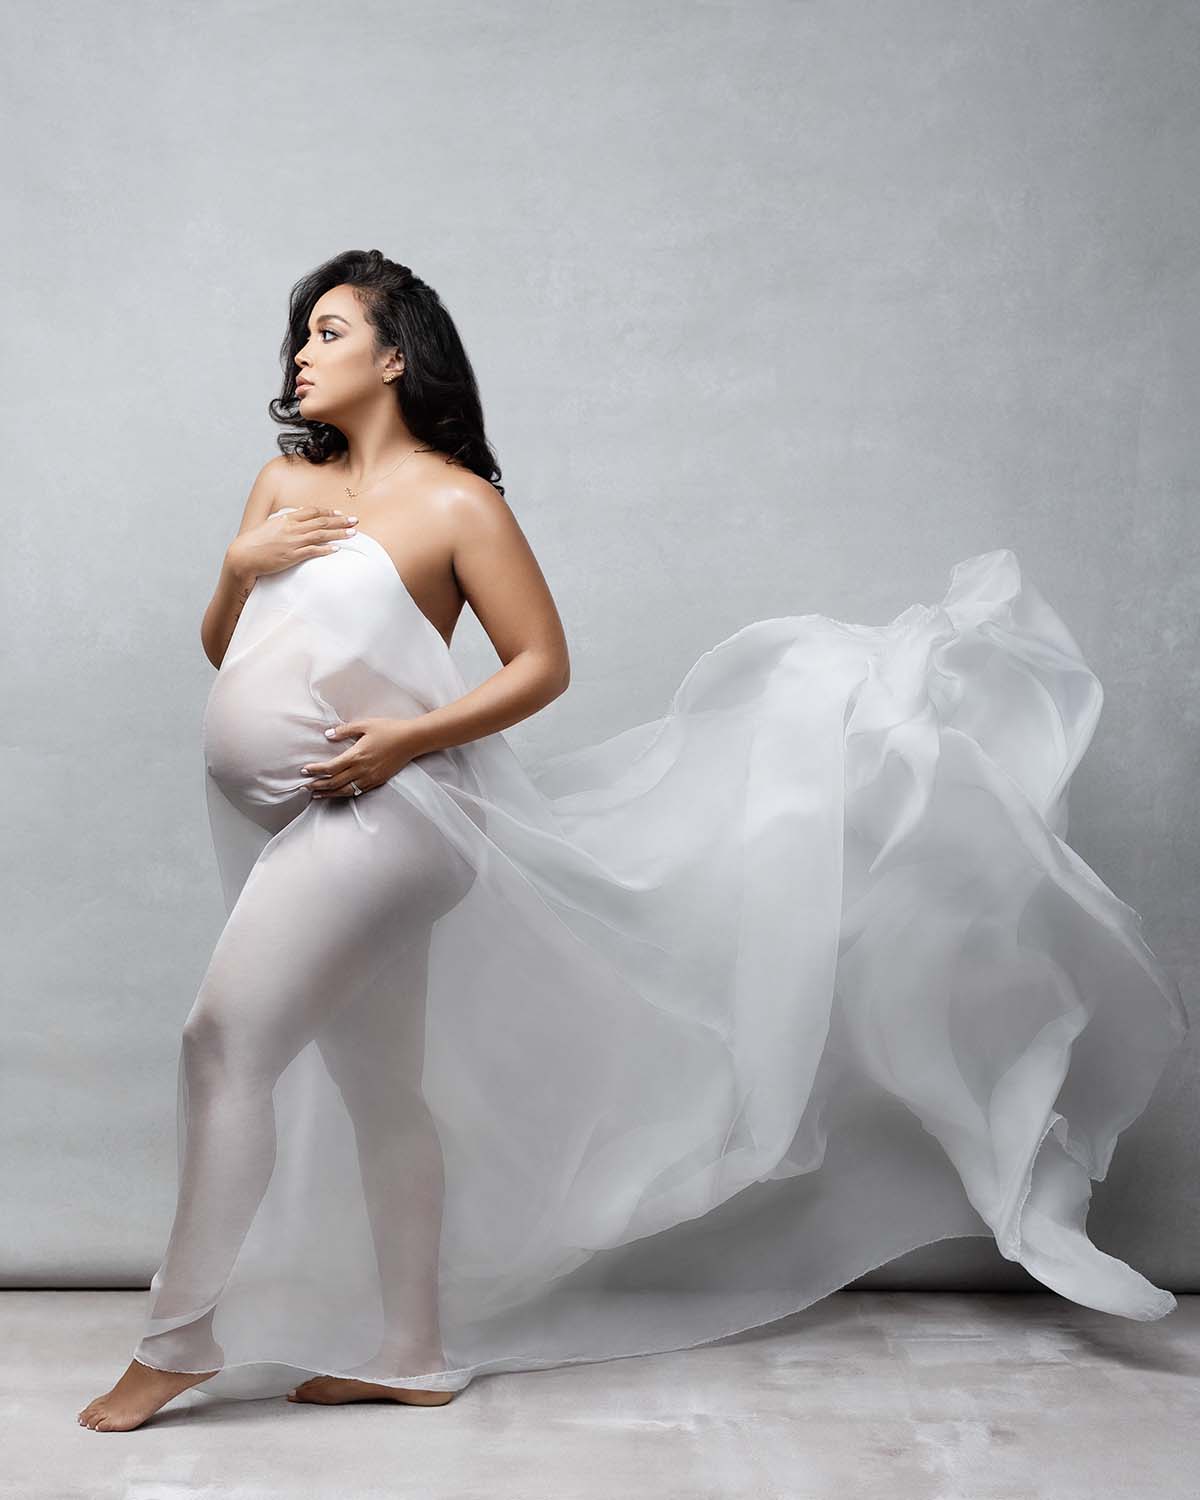 professional maternity photos, maternity photography packages, get pregnancy photos taken